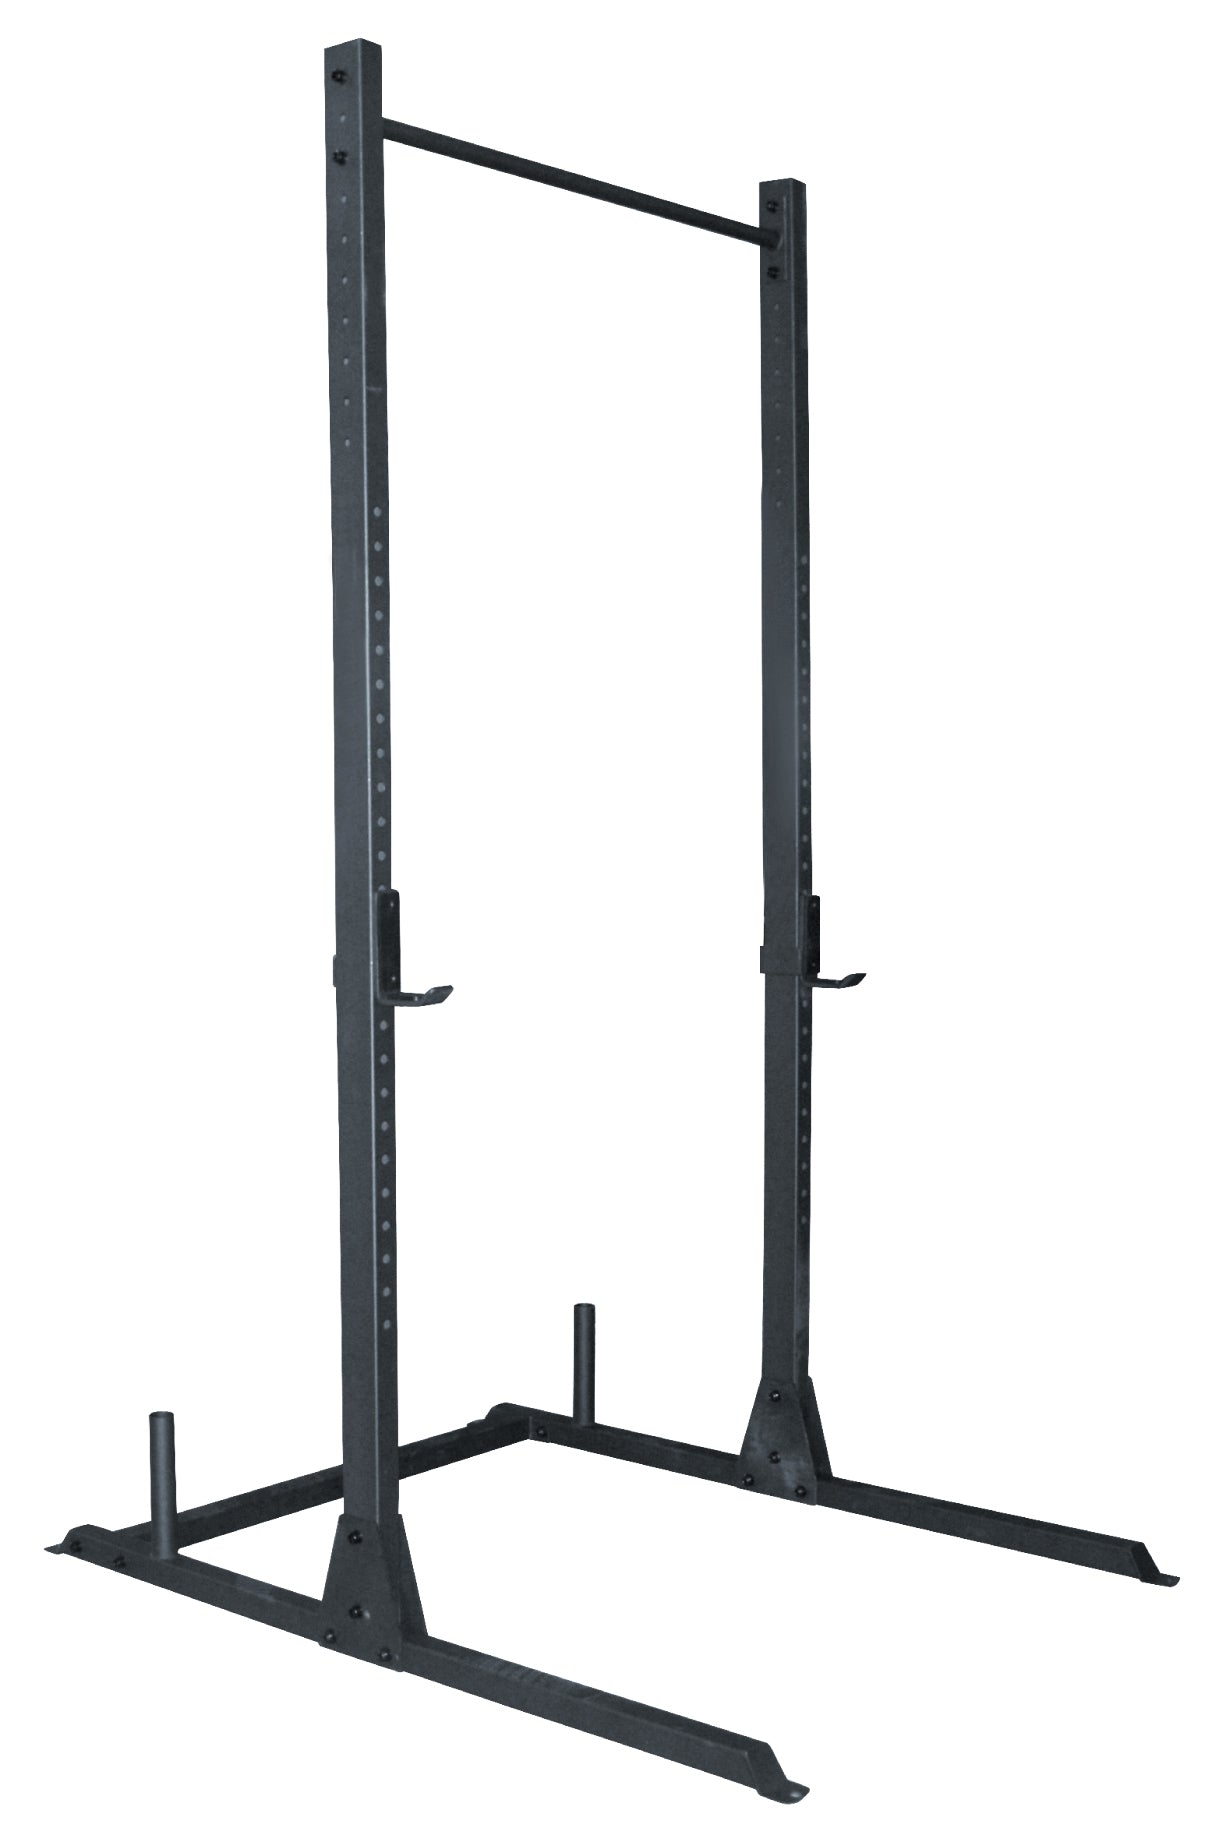 HALF-RACK with Olympic Plate Storage 8' Tall